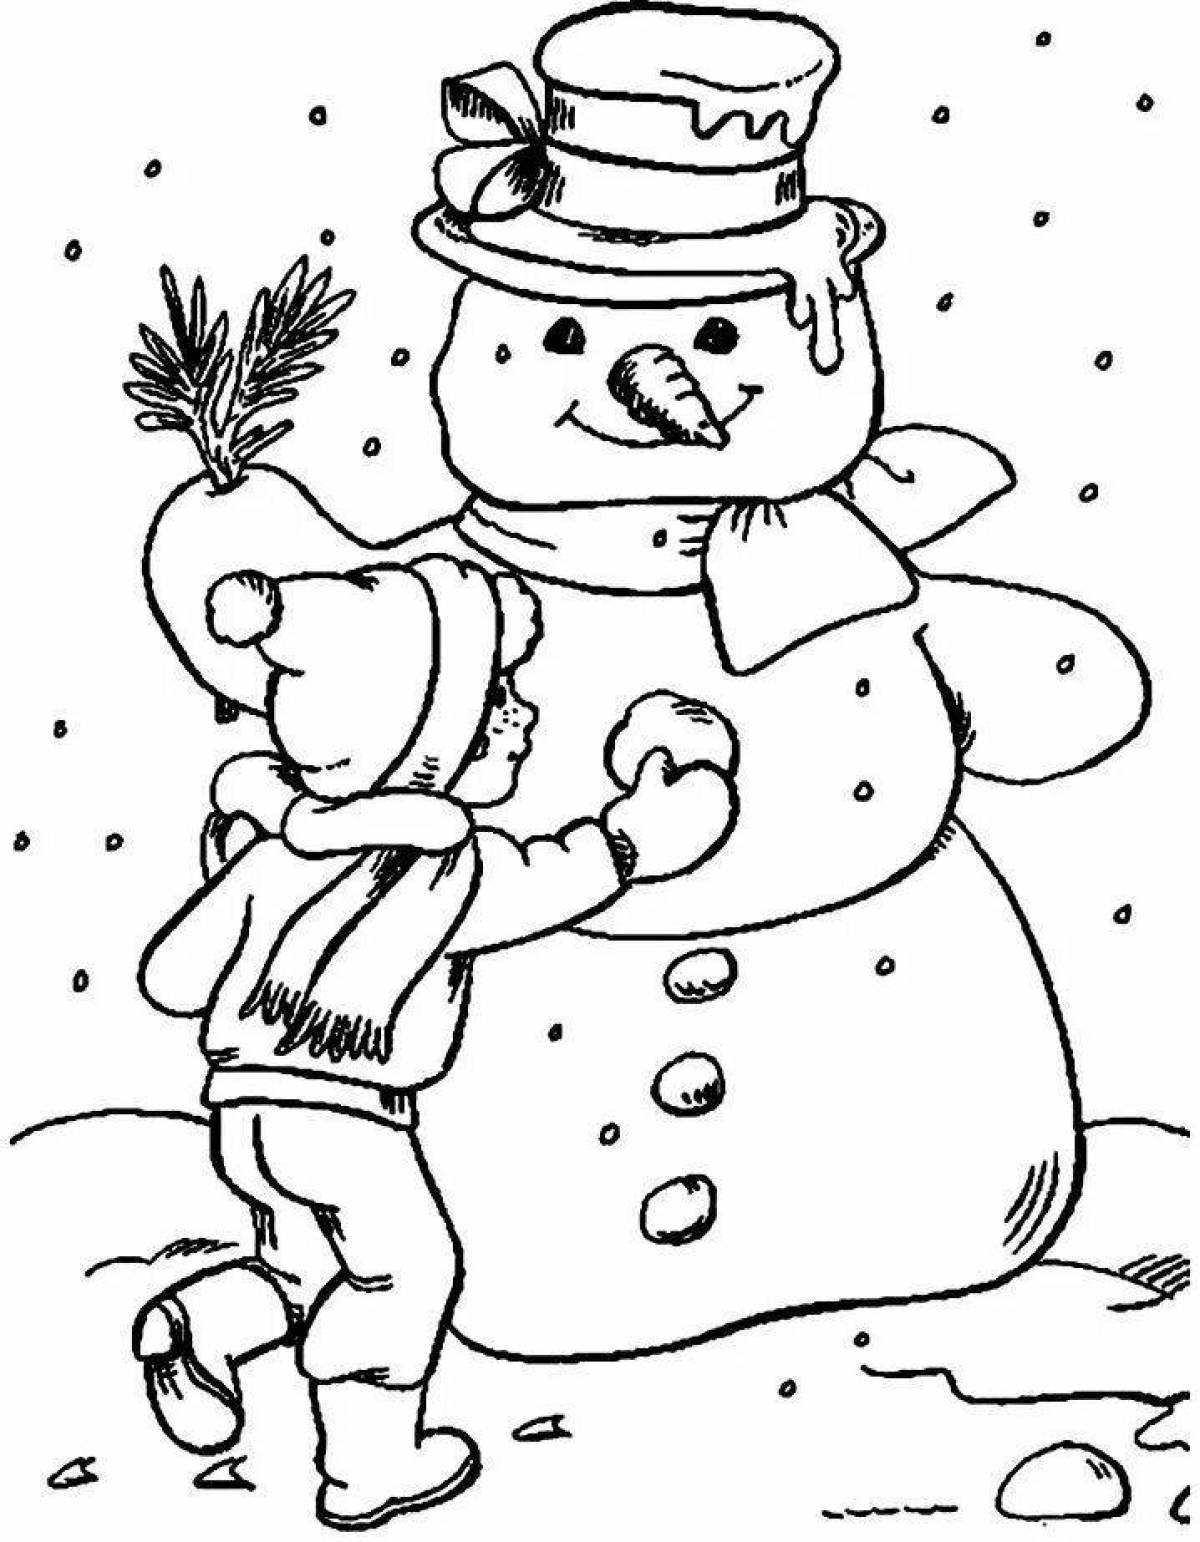 Smiling snowman coloring book